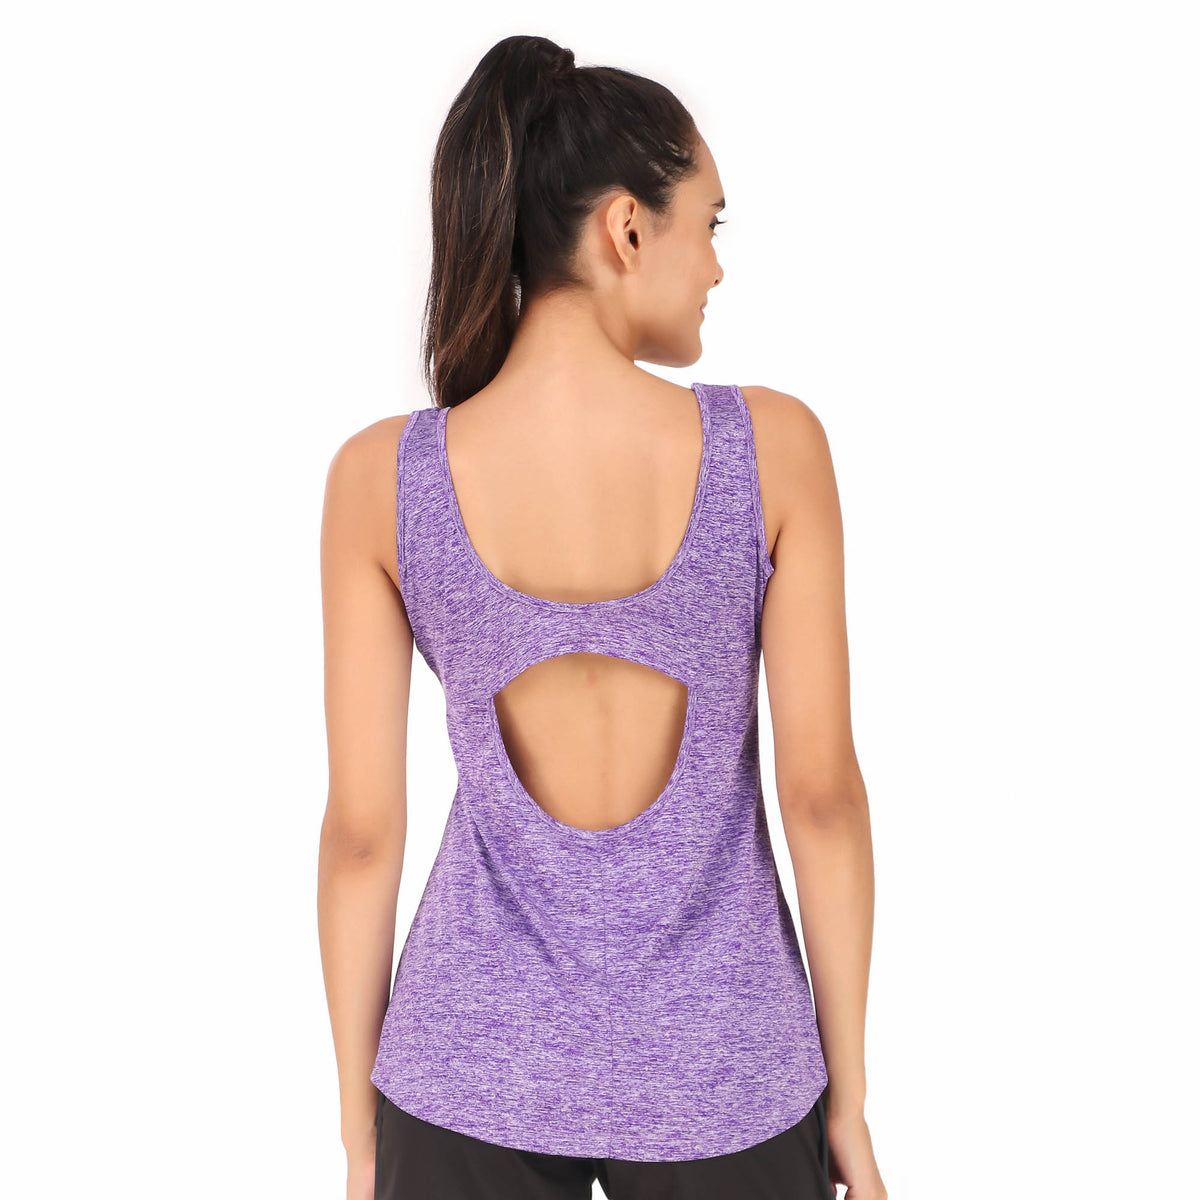 Back Cut-Out Sleeveless Tshirt For Women (Purple)